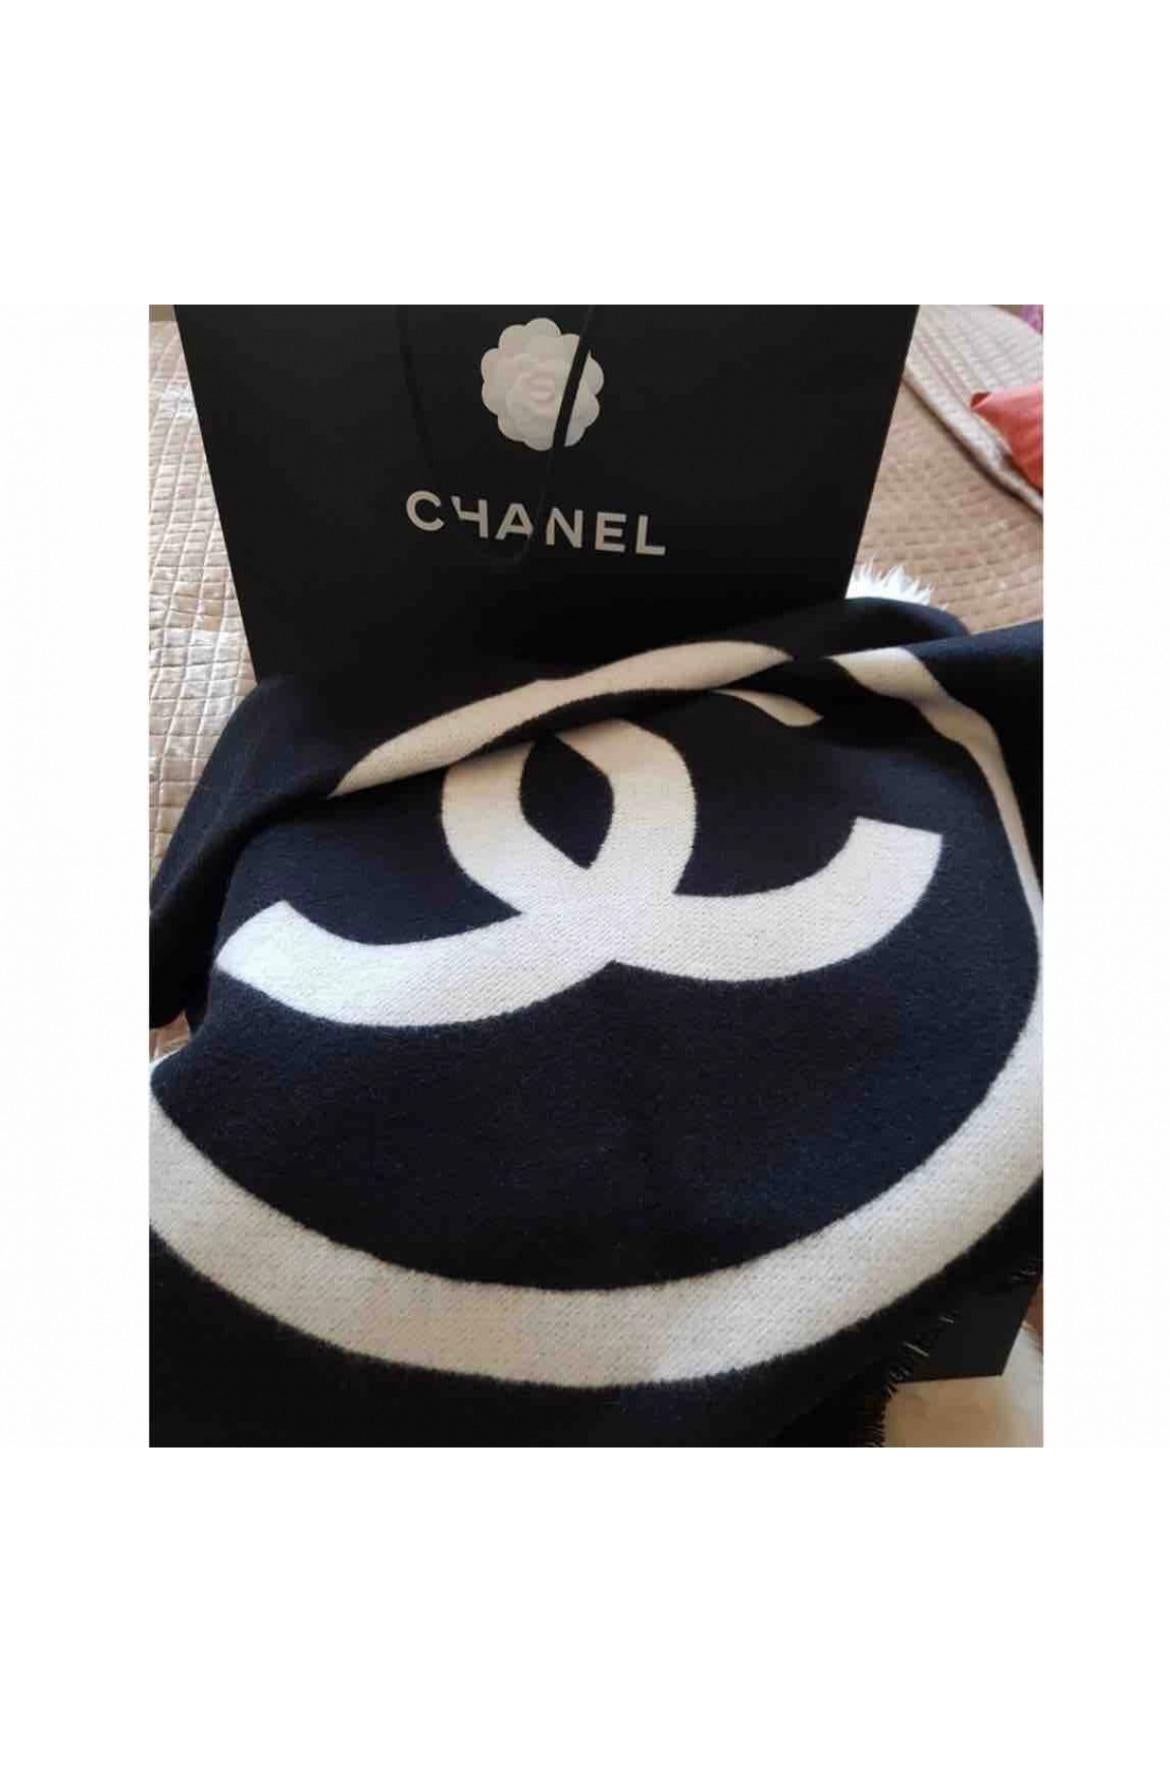 Chanel shawl/stole 100% cashmere in black and white. So cosy and stylish. Perfect for winter outfits, so warm can replace a cape or a jacket. 